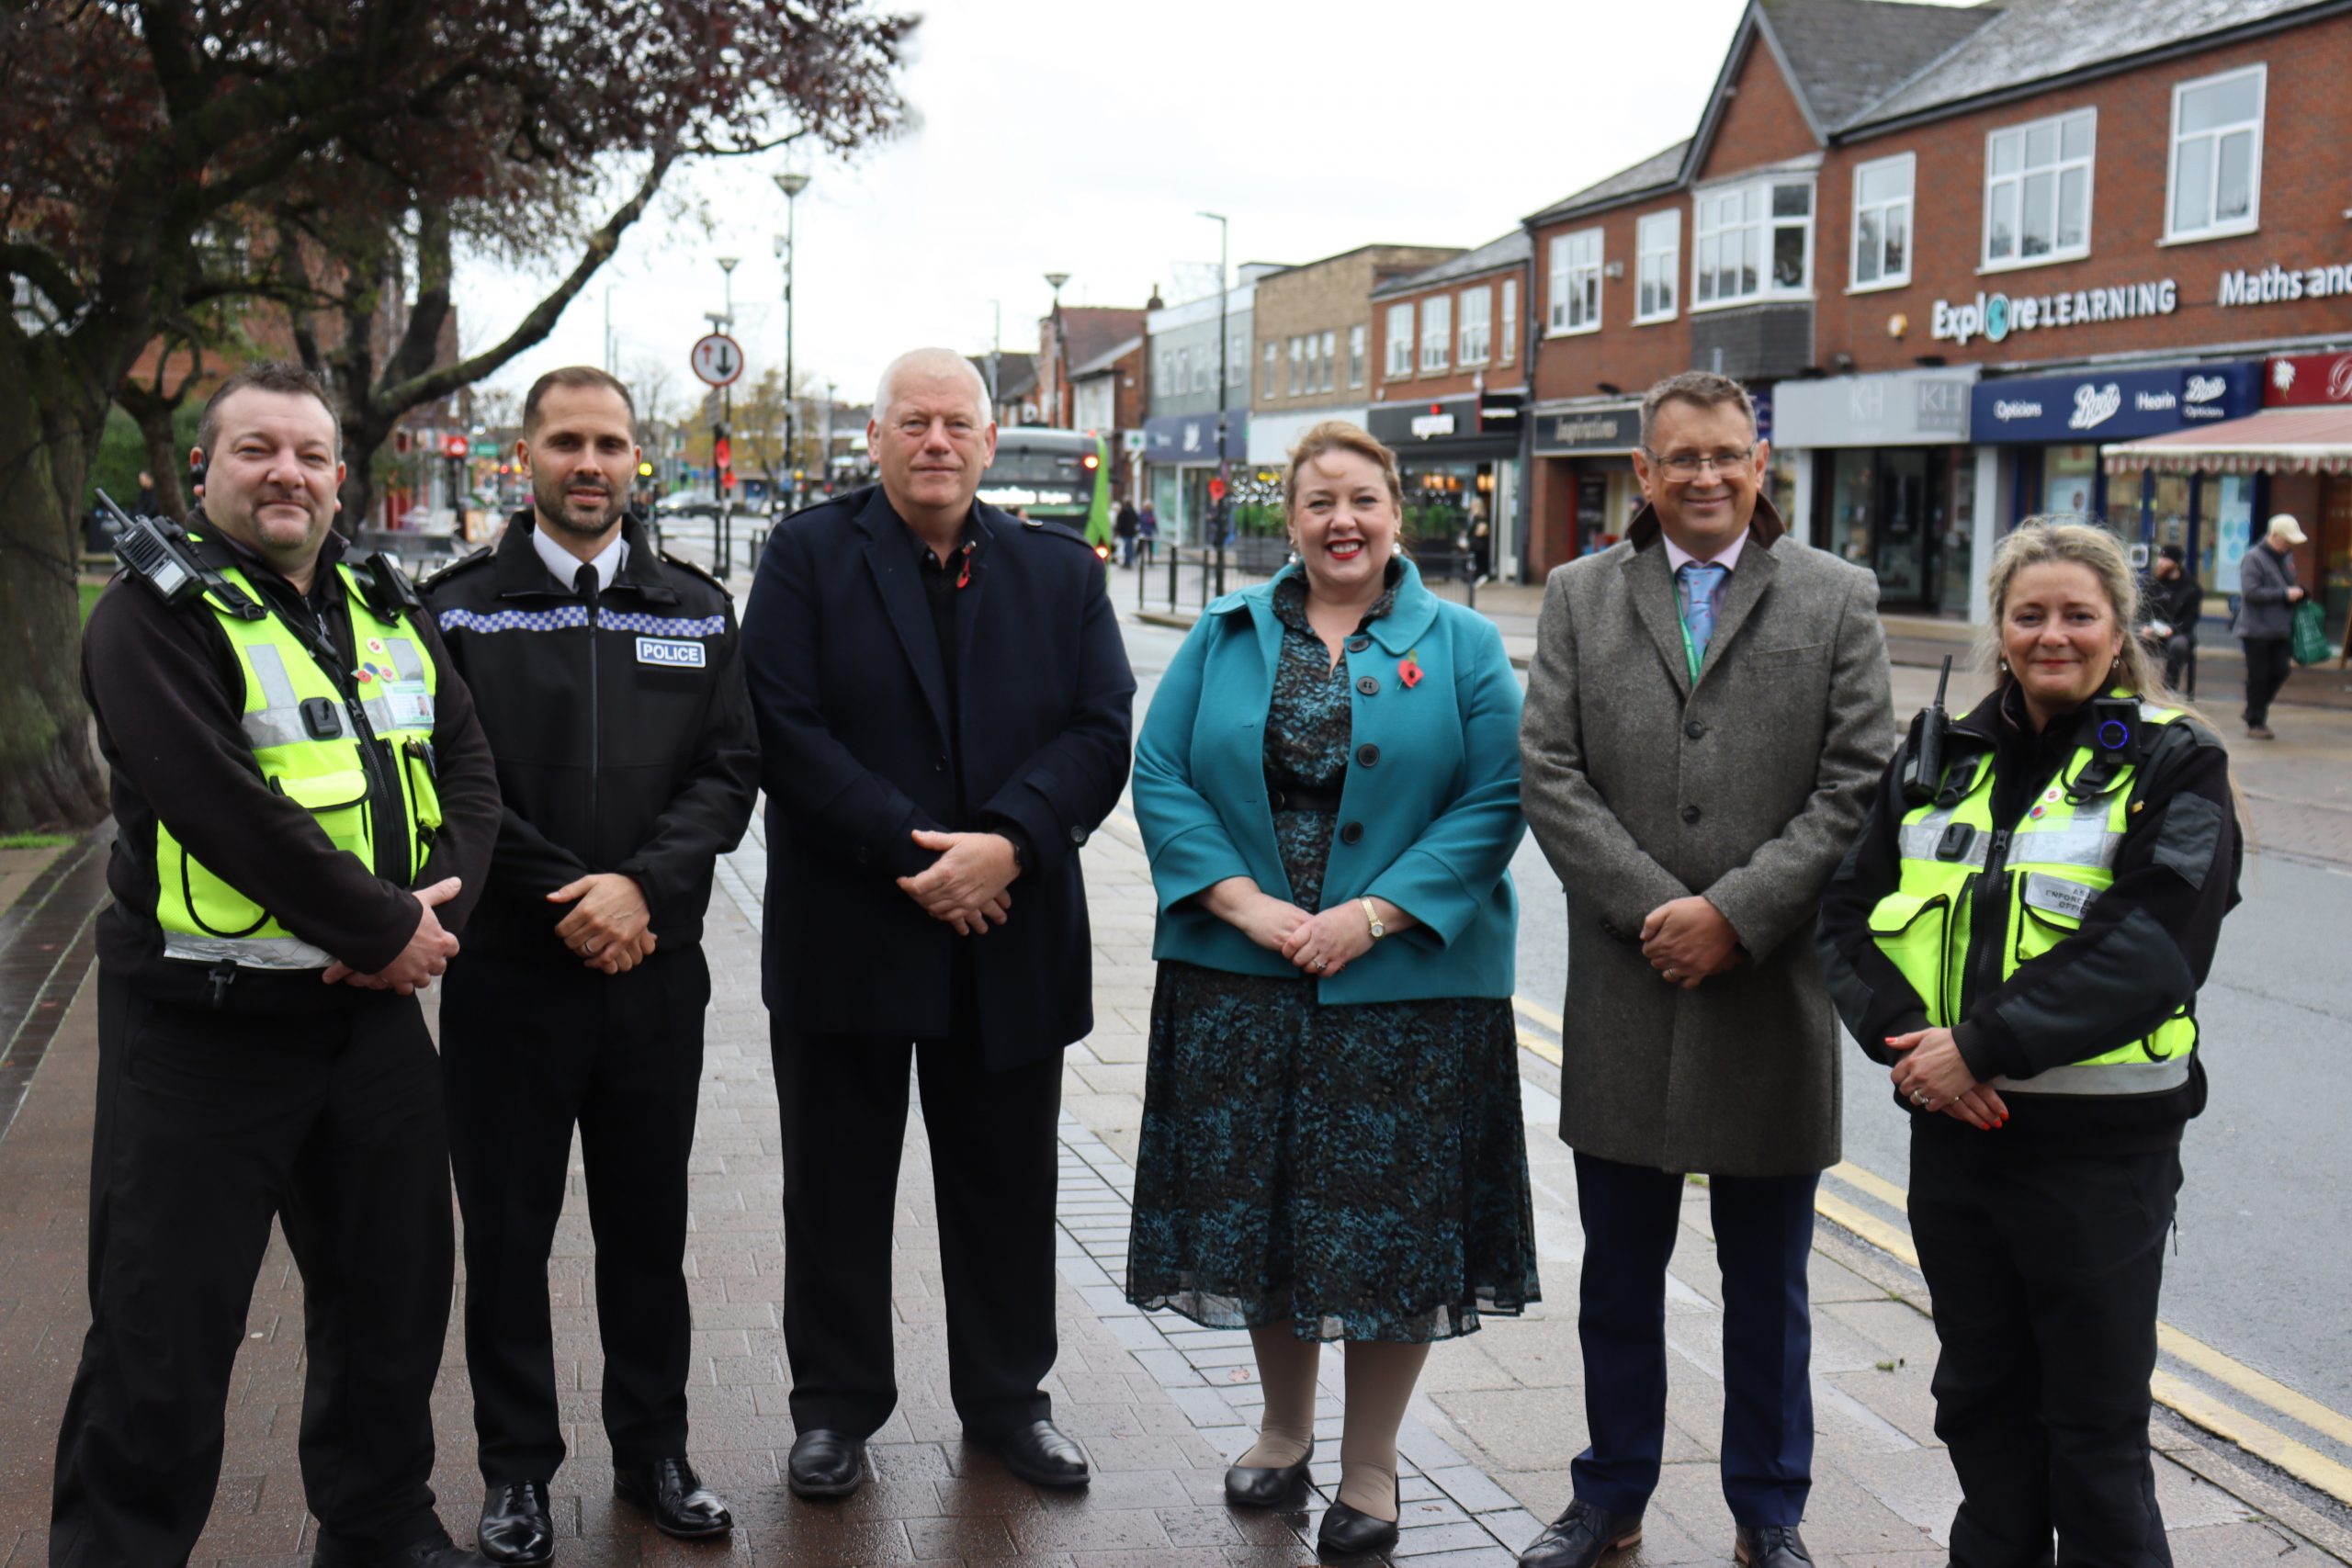 The new wardens are now patrolling on Friday and Saturday evenings in West Bridgford and Trent Bridge scaled